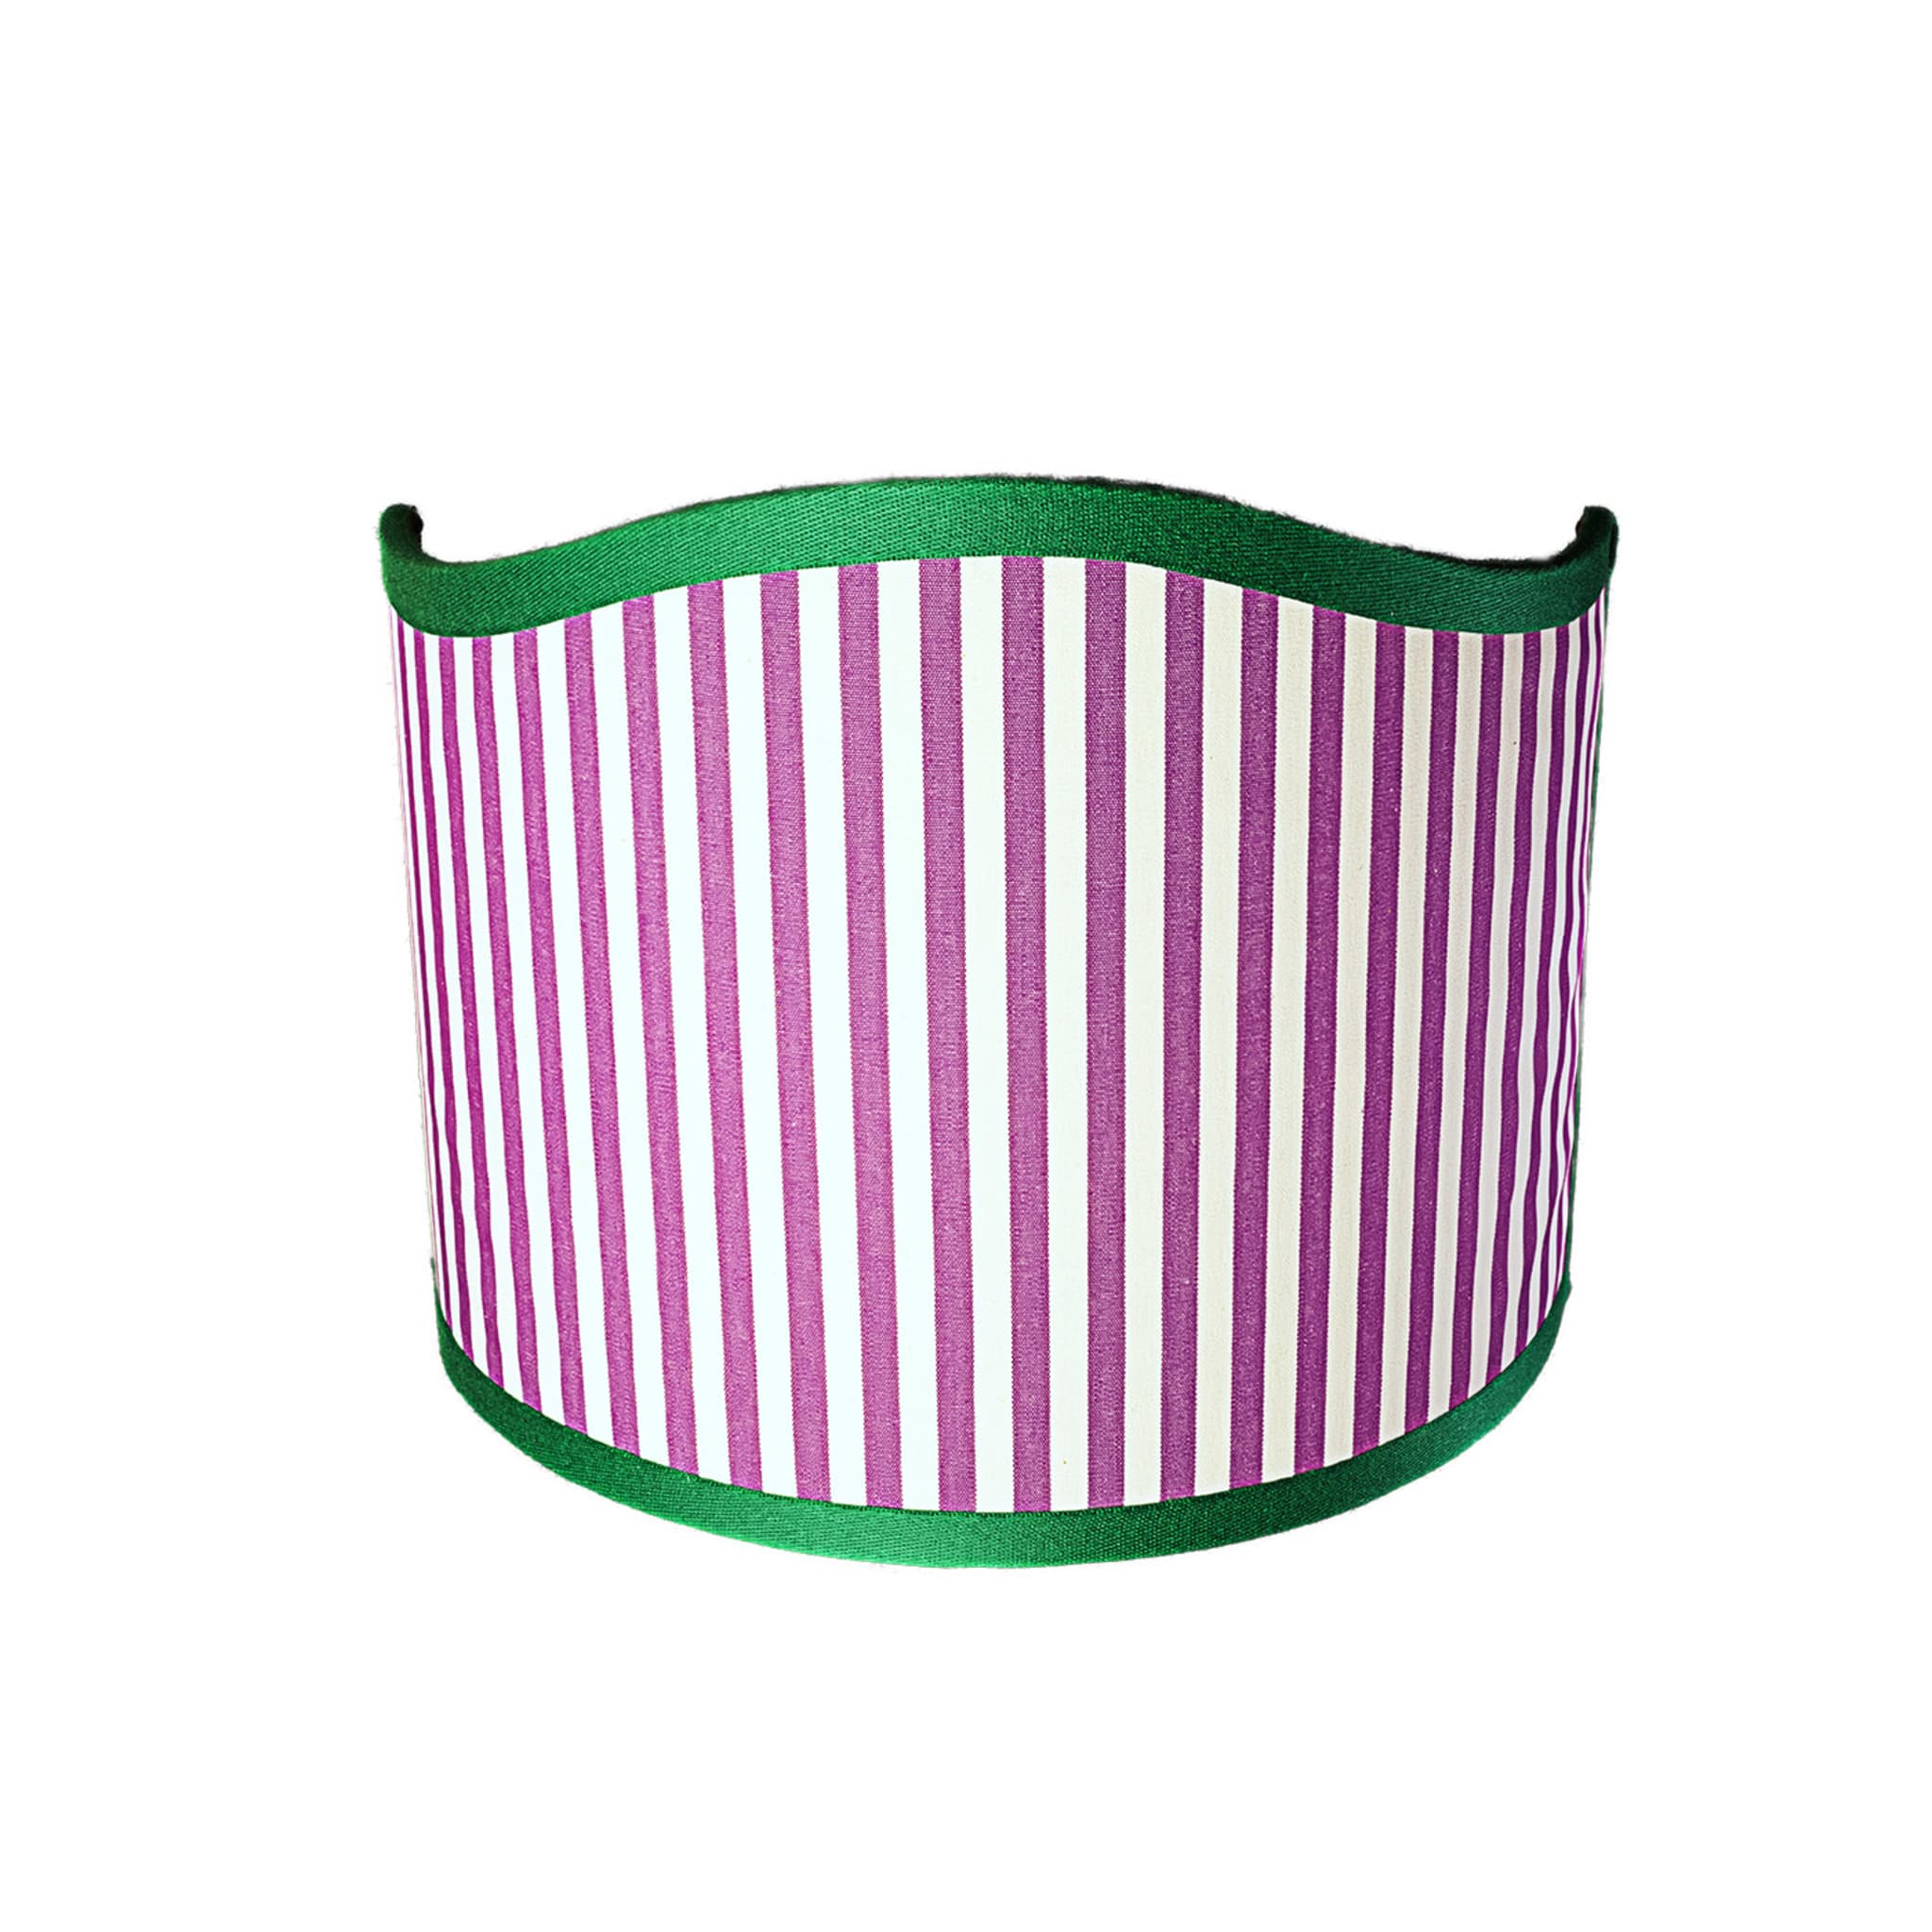 Stripes Green and Purple Wall Lamp - Alternative view 1